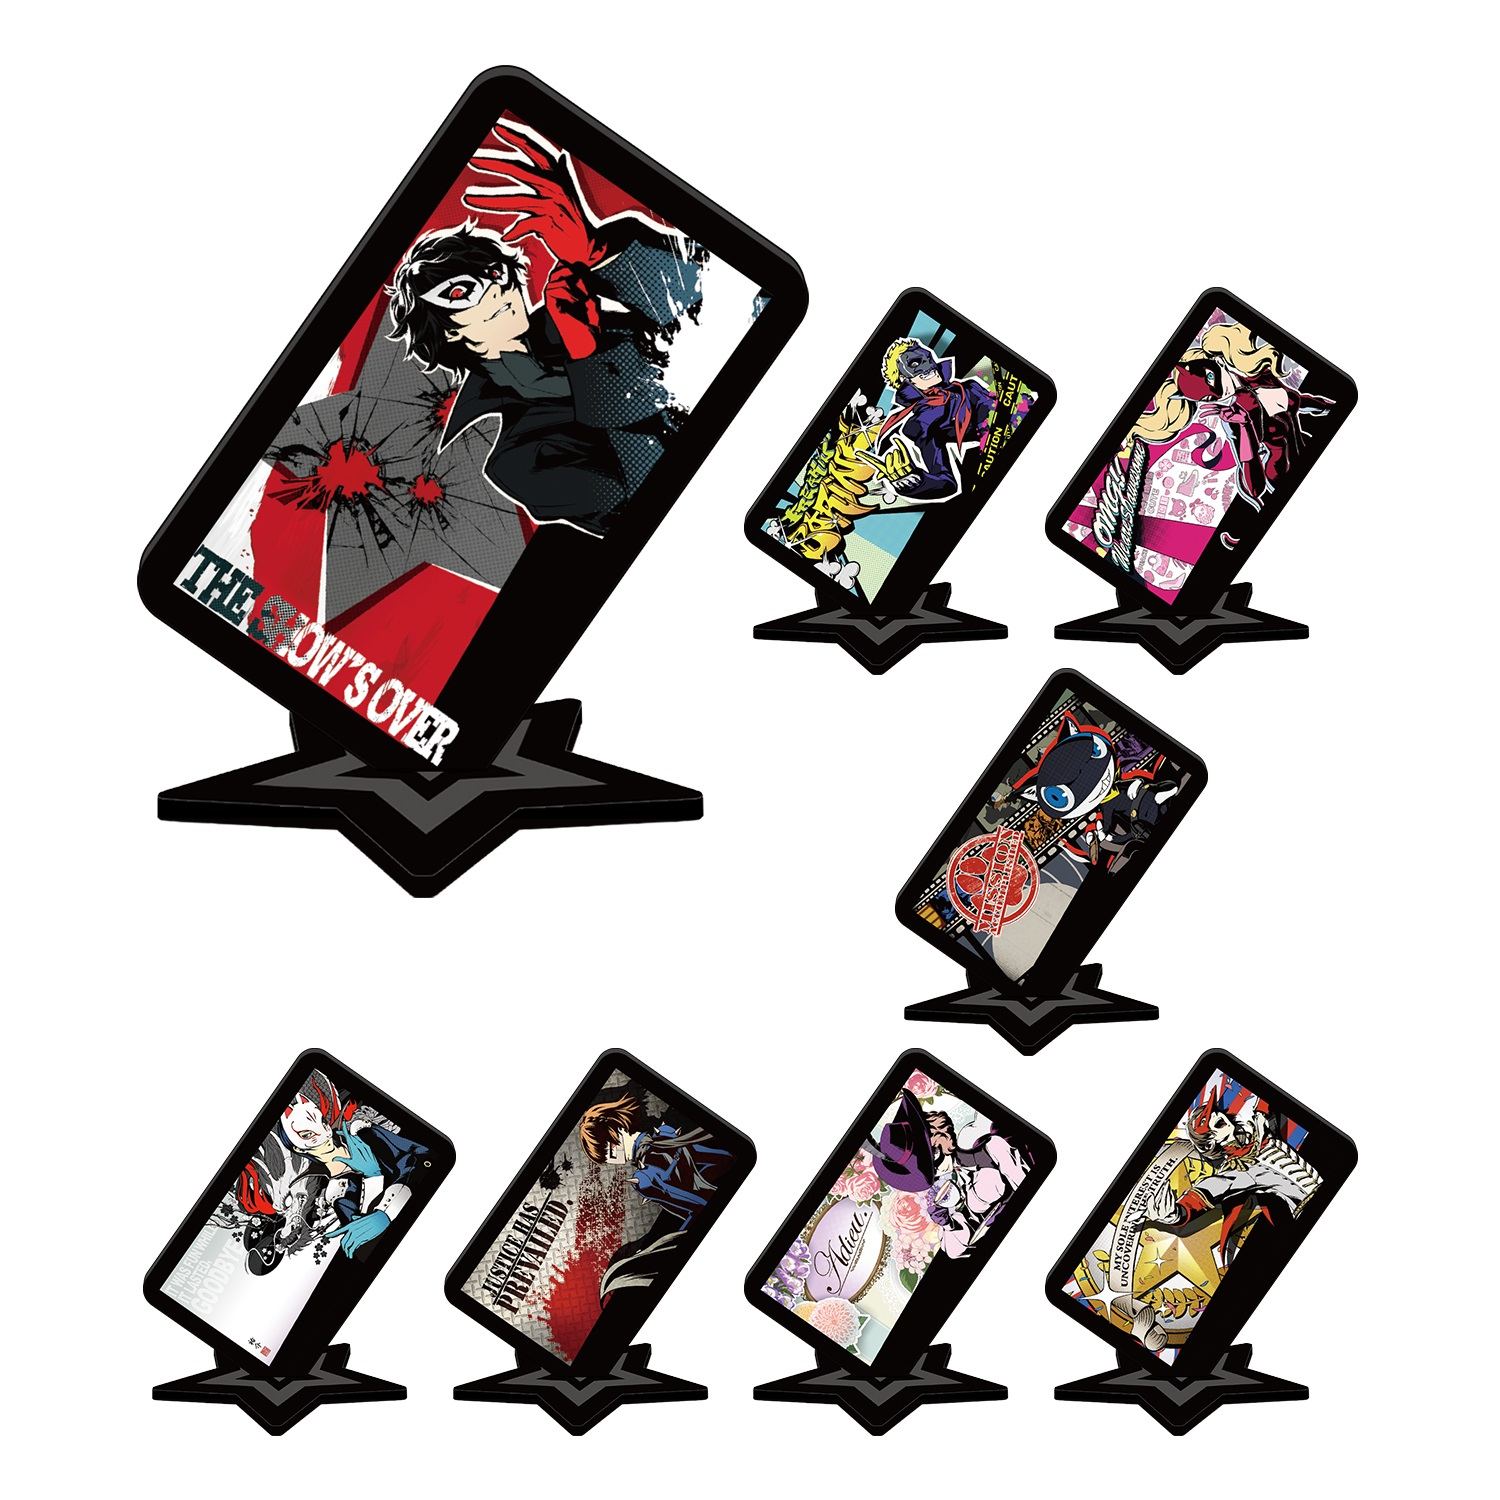 PERSONA 5 TRADING ACRYLIC STAND (SET OF 8 PIECES) armabianca